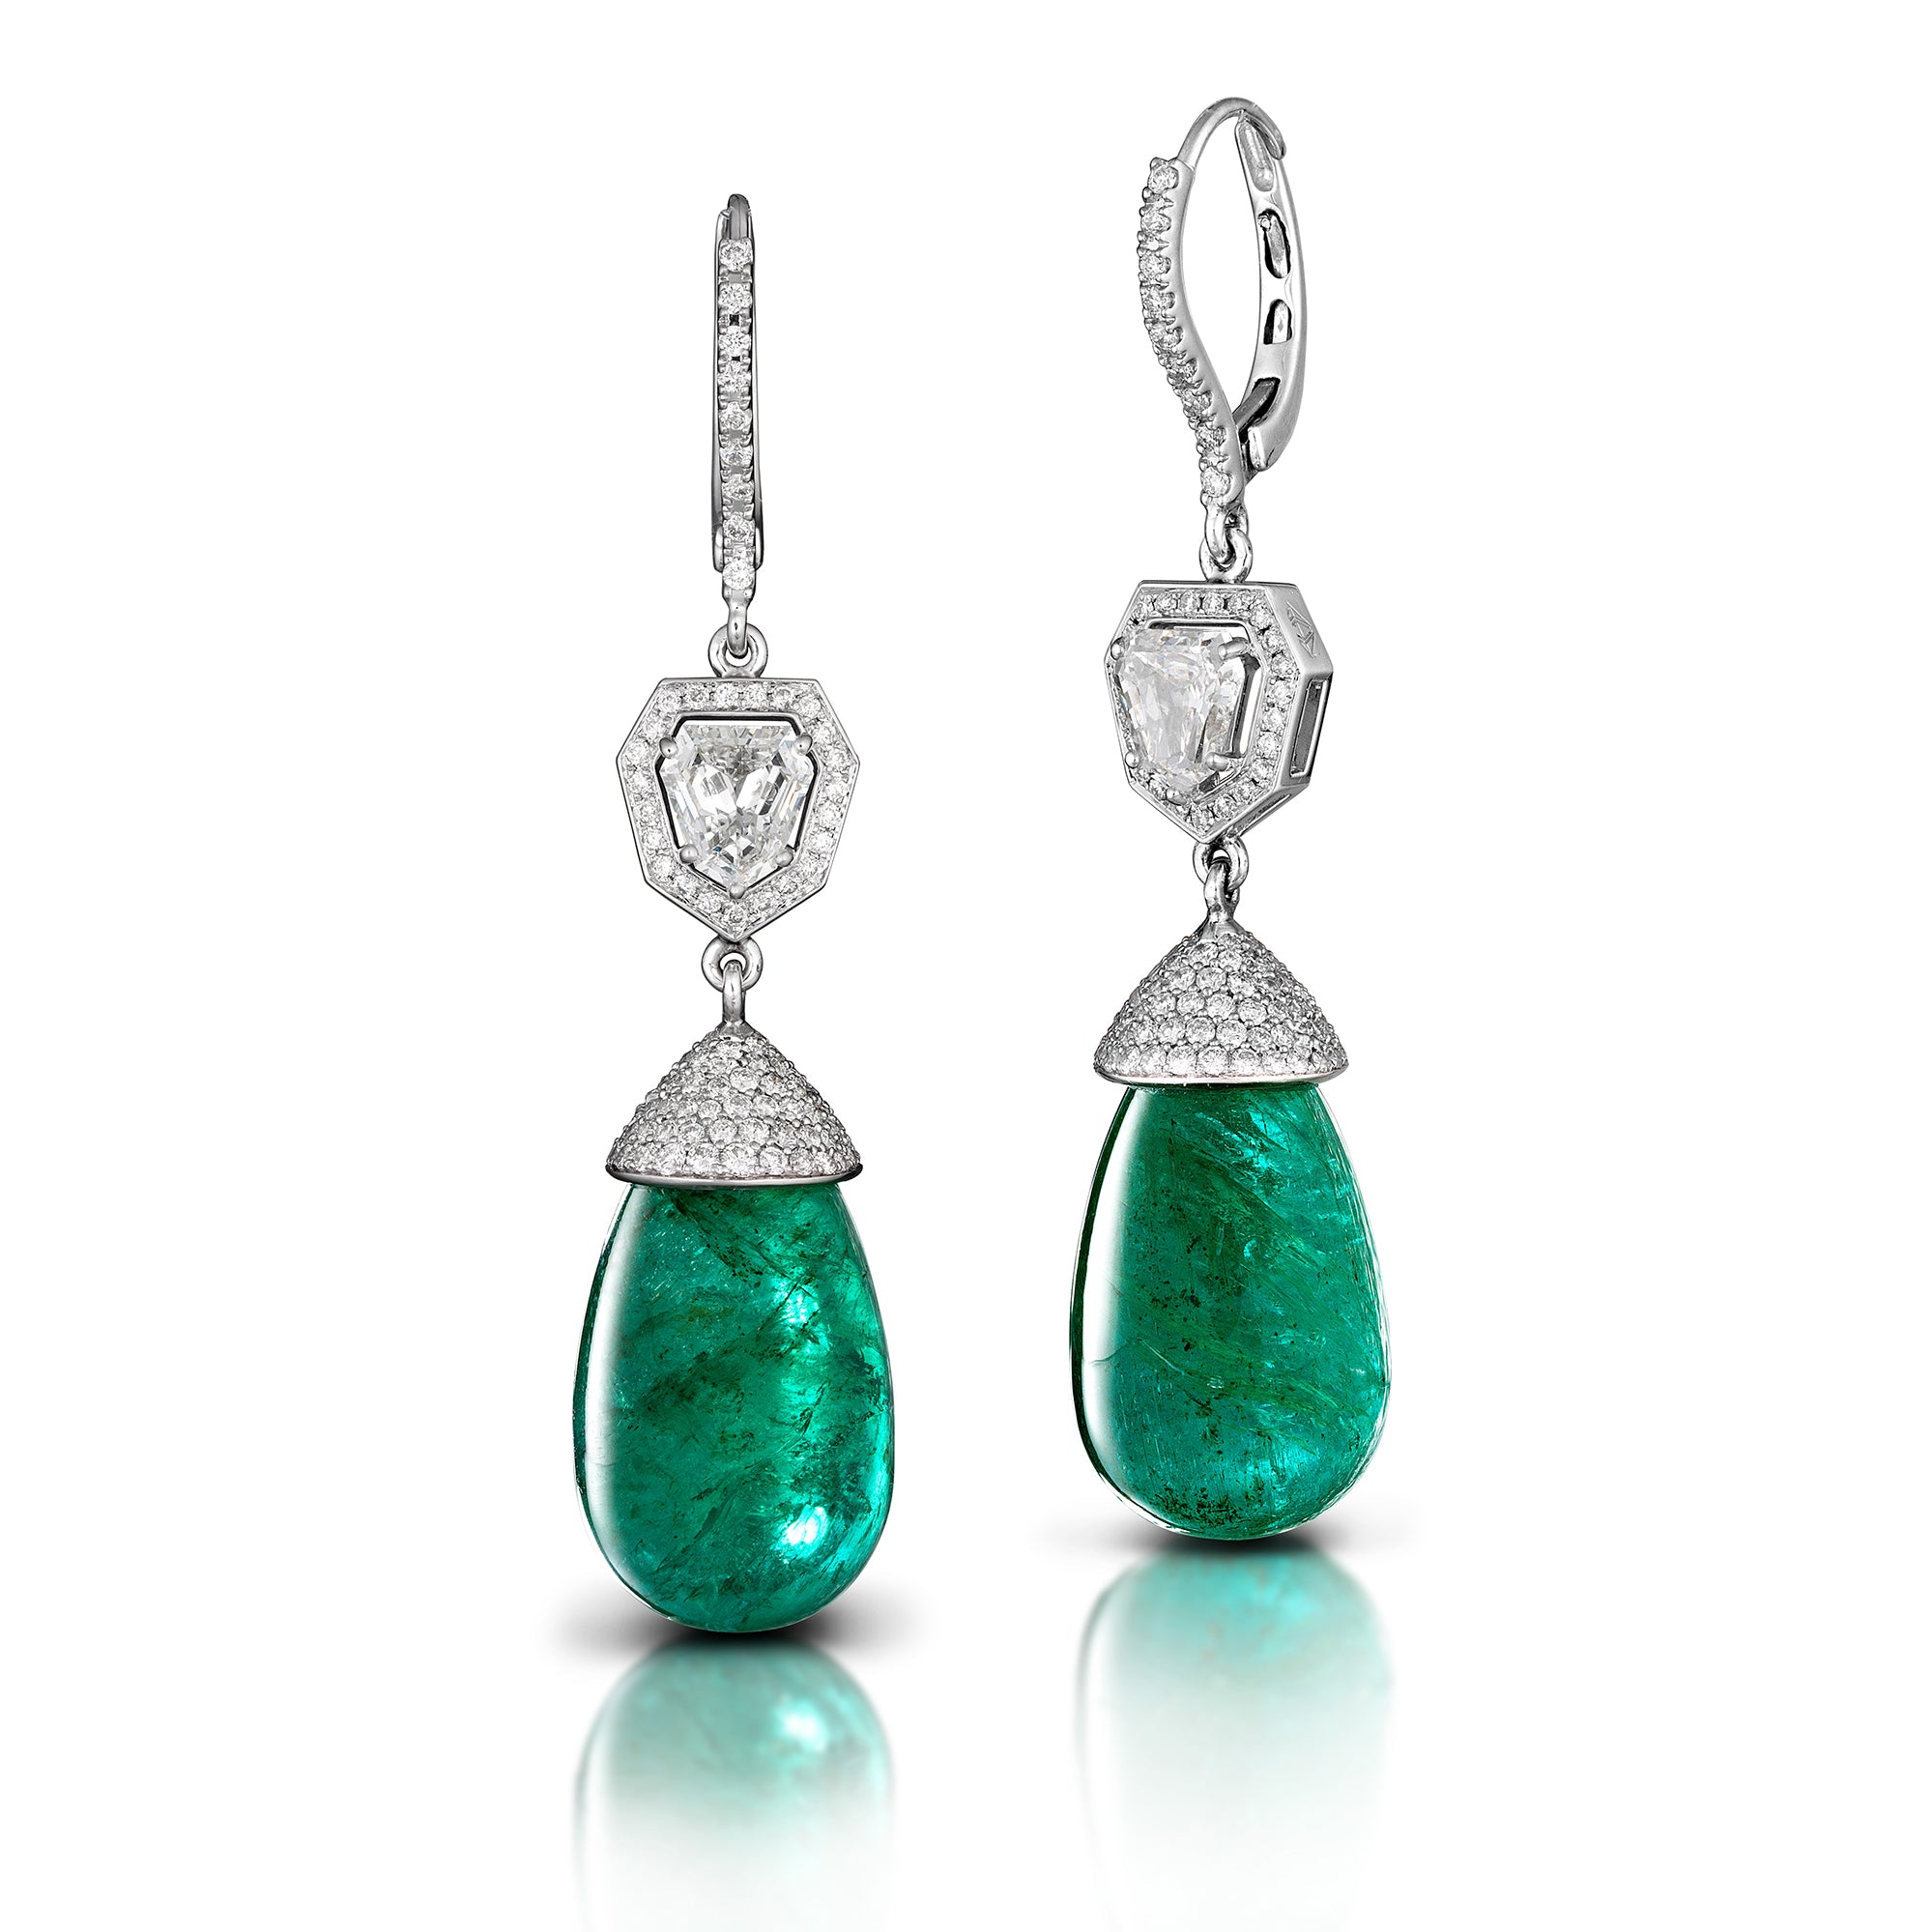 Women's Peacock Design Emerald Green Earrings By Much More